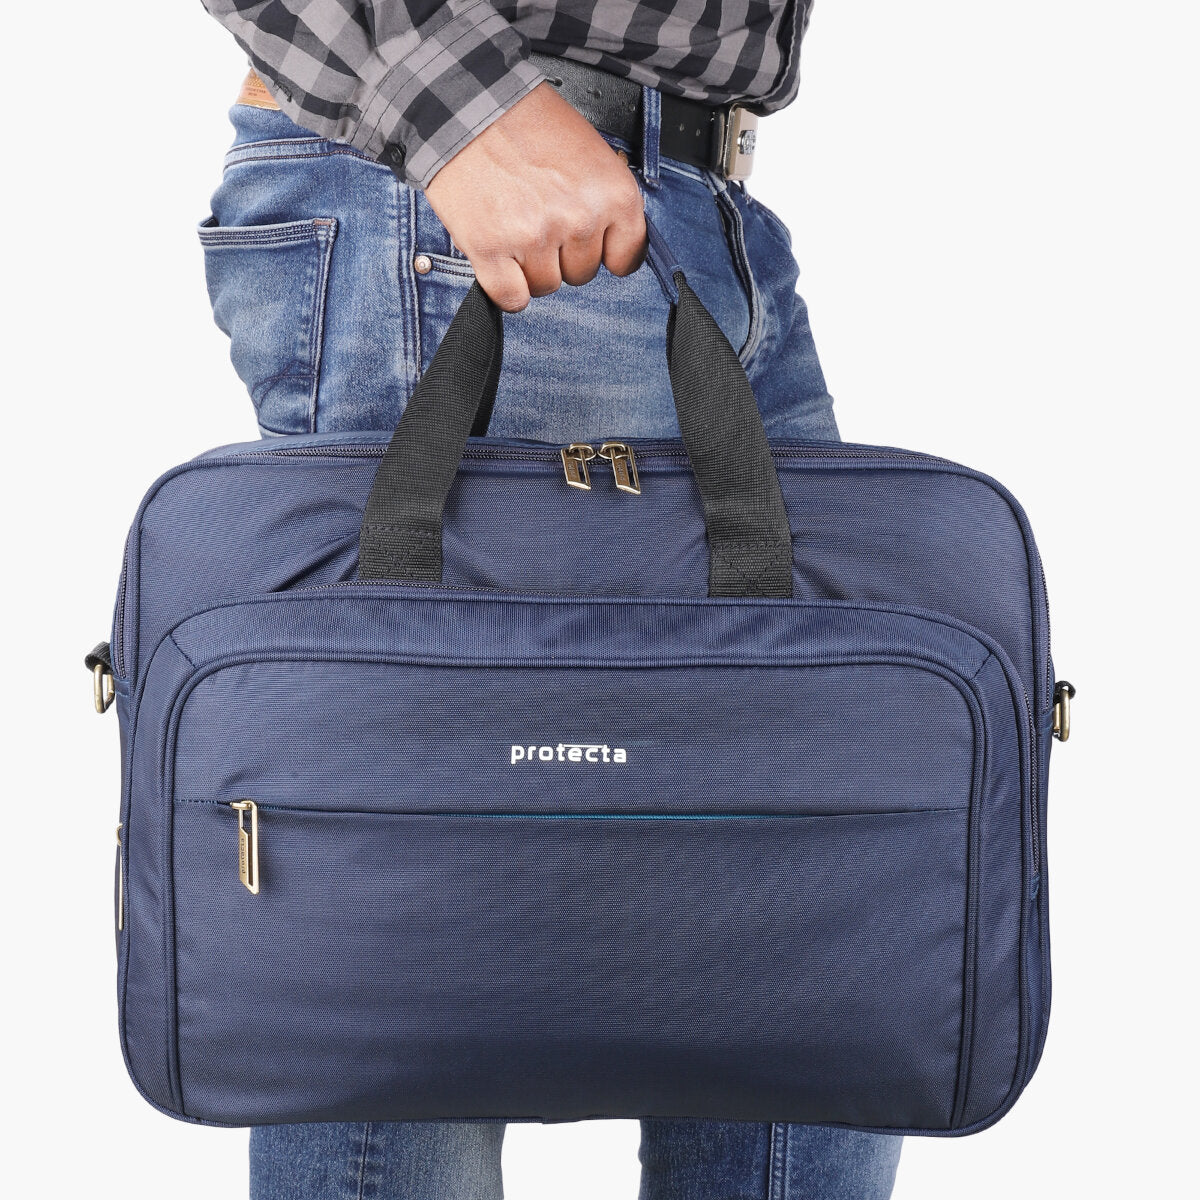 Navy-Blue, Protecta Staunch Ally Travel & Offfice Laptop Bag-8